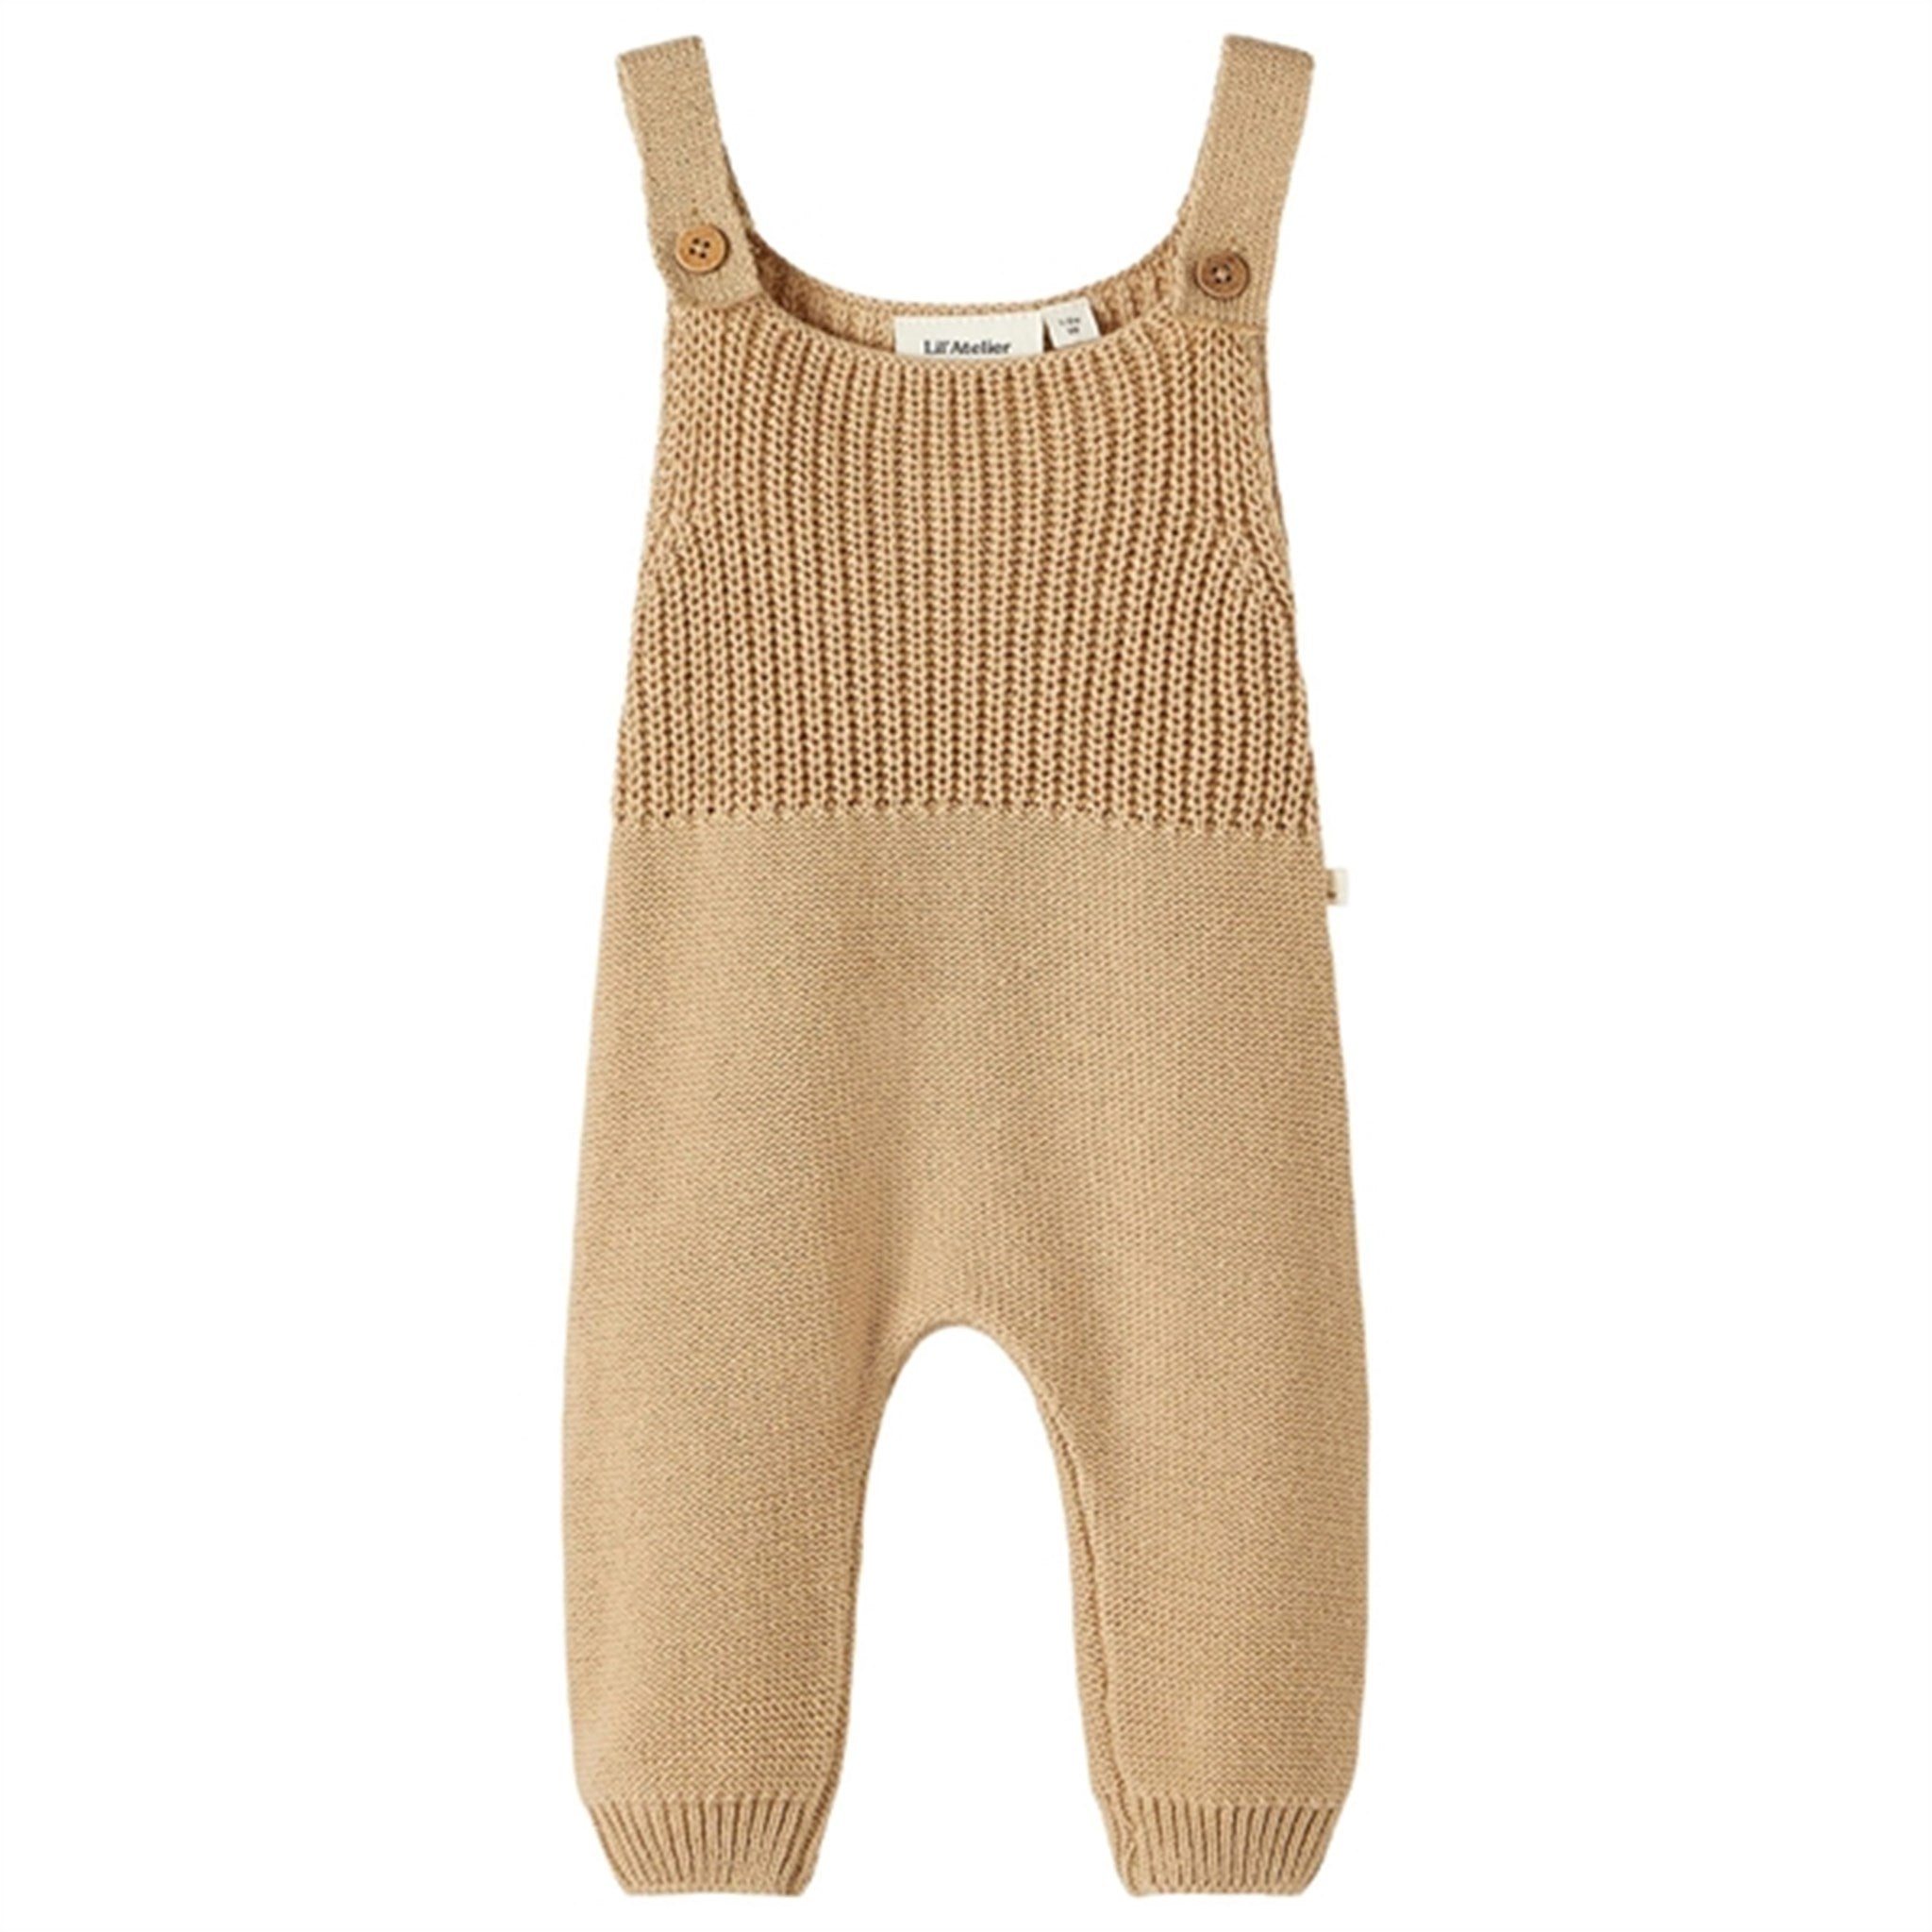 Lil' Atelier Curds & Whey Laguno Loose Knit Overall